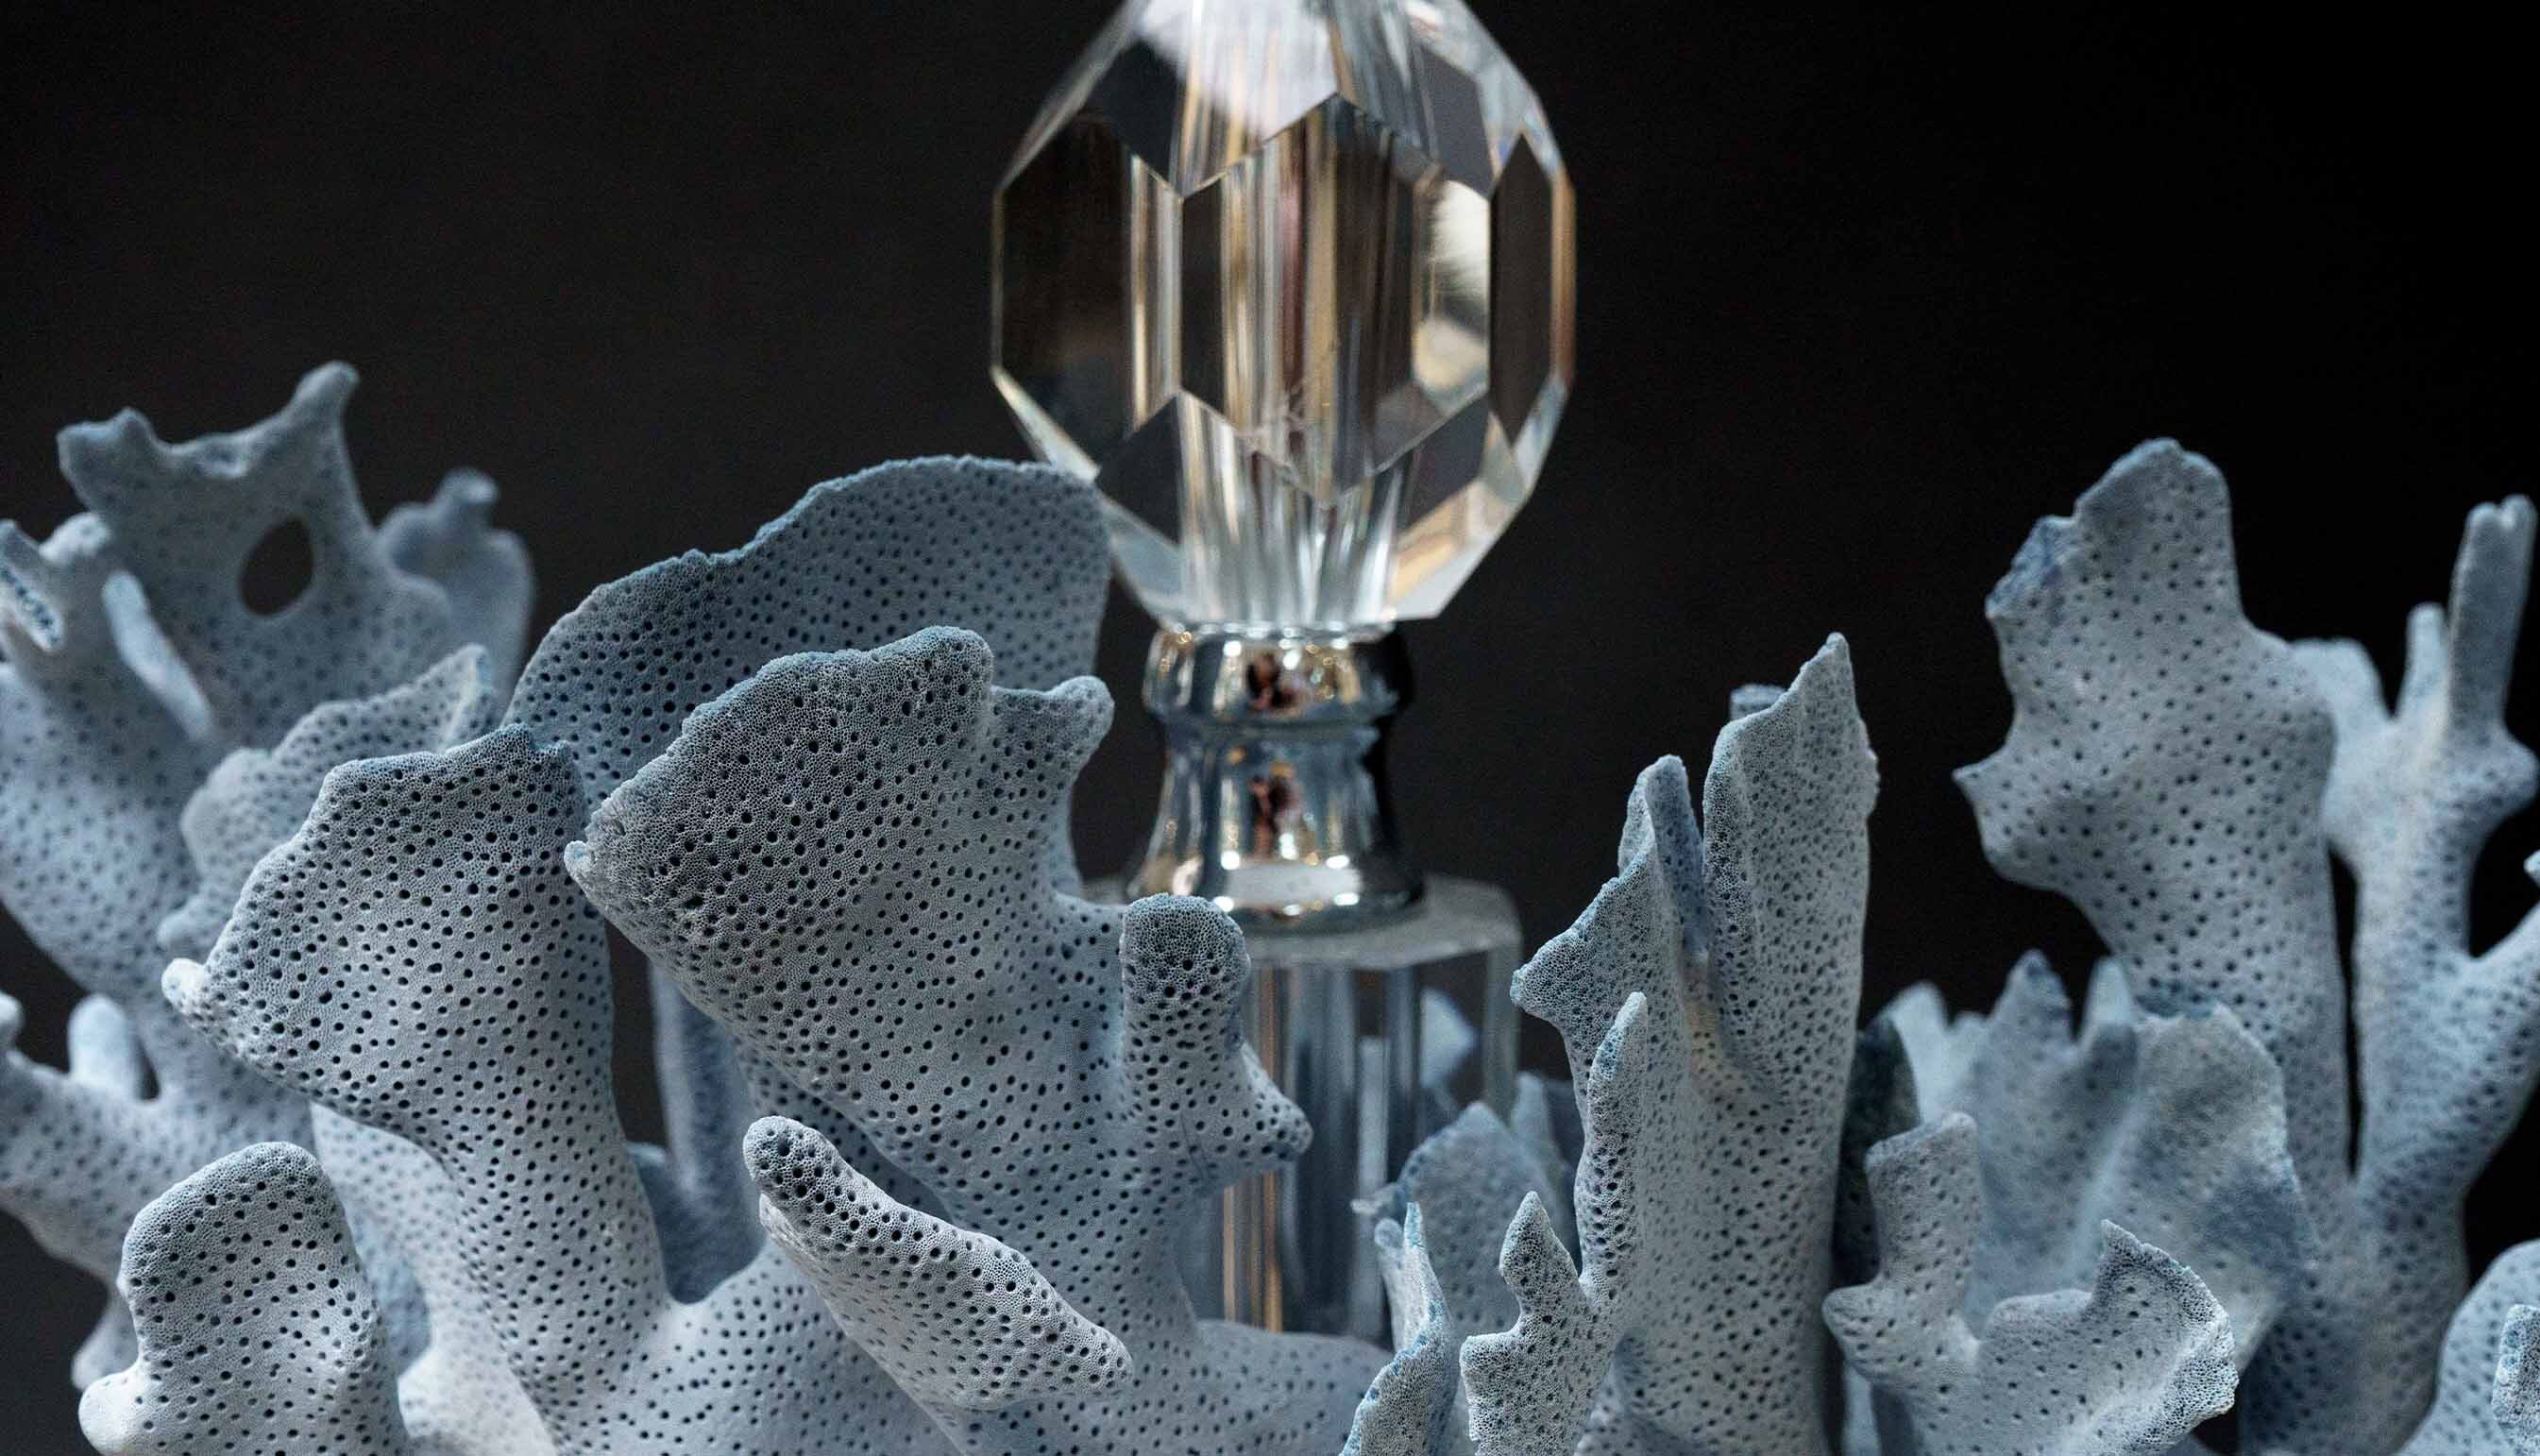 Blue Coral Creation Lamp